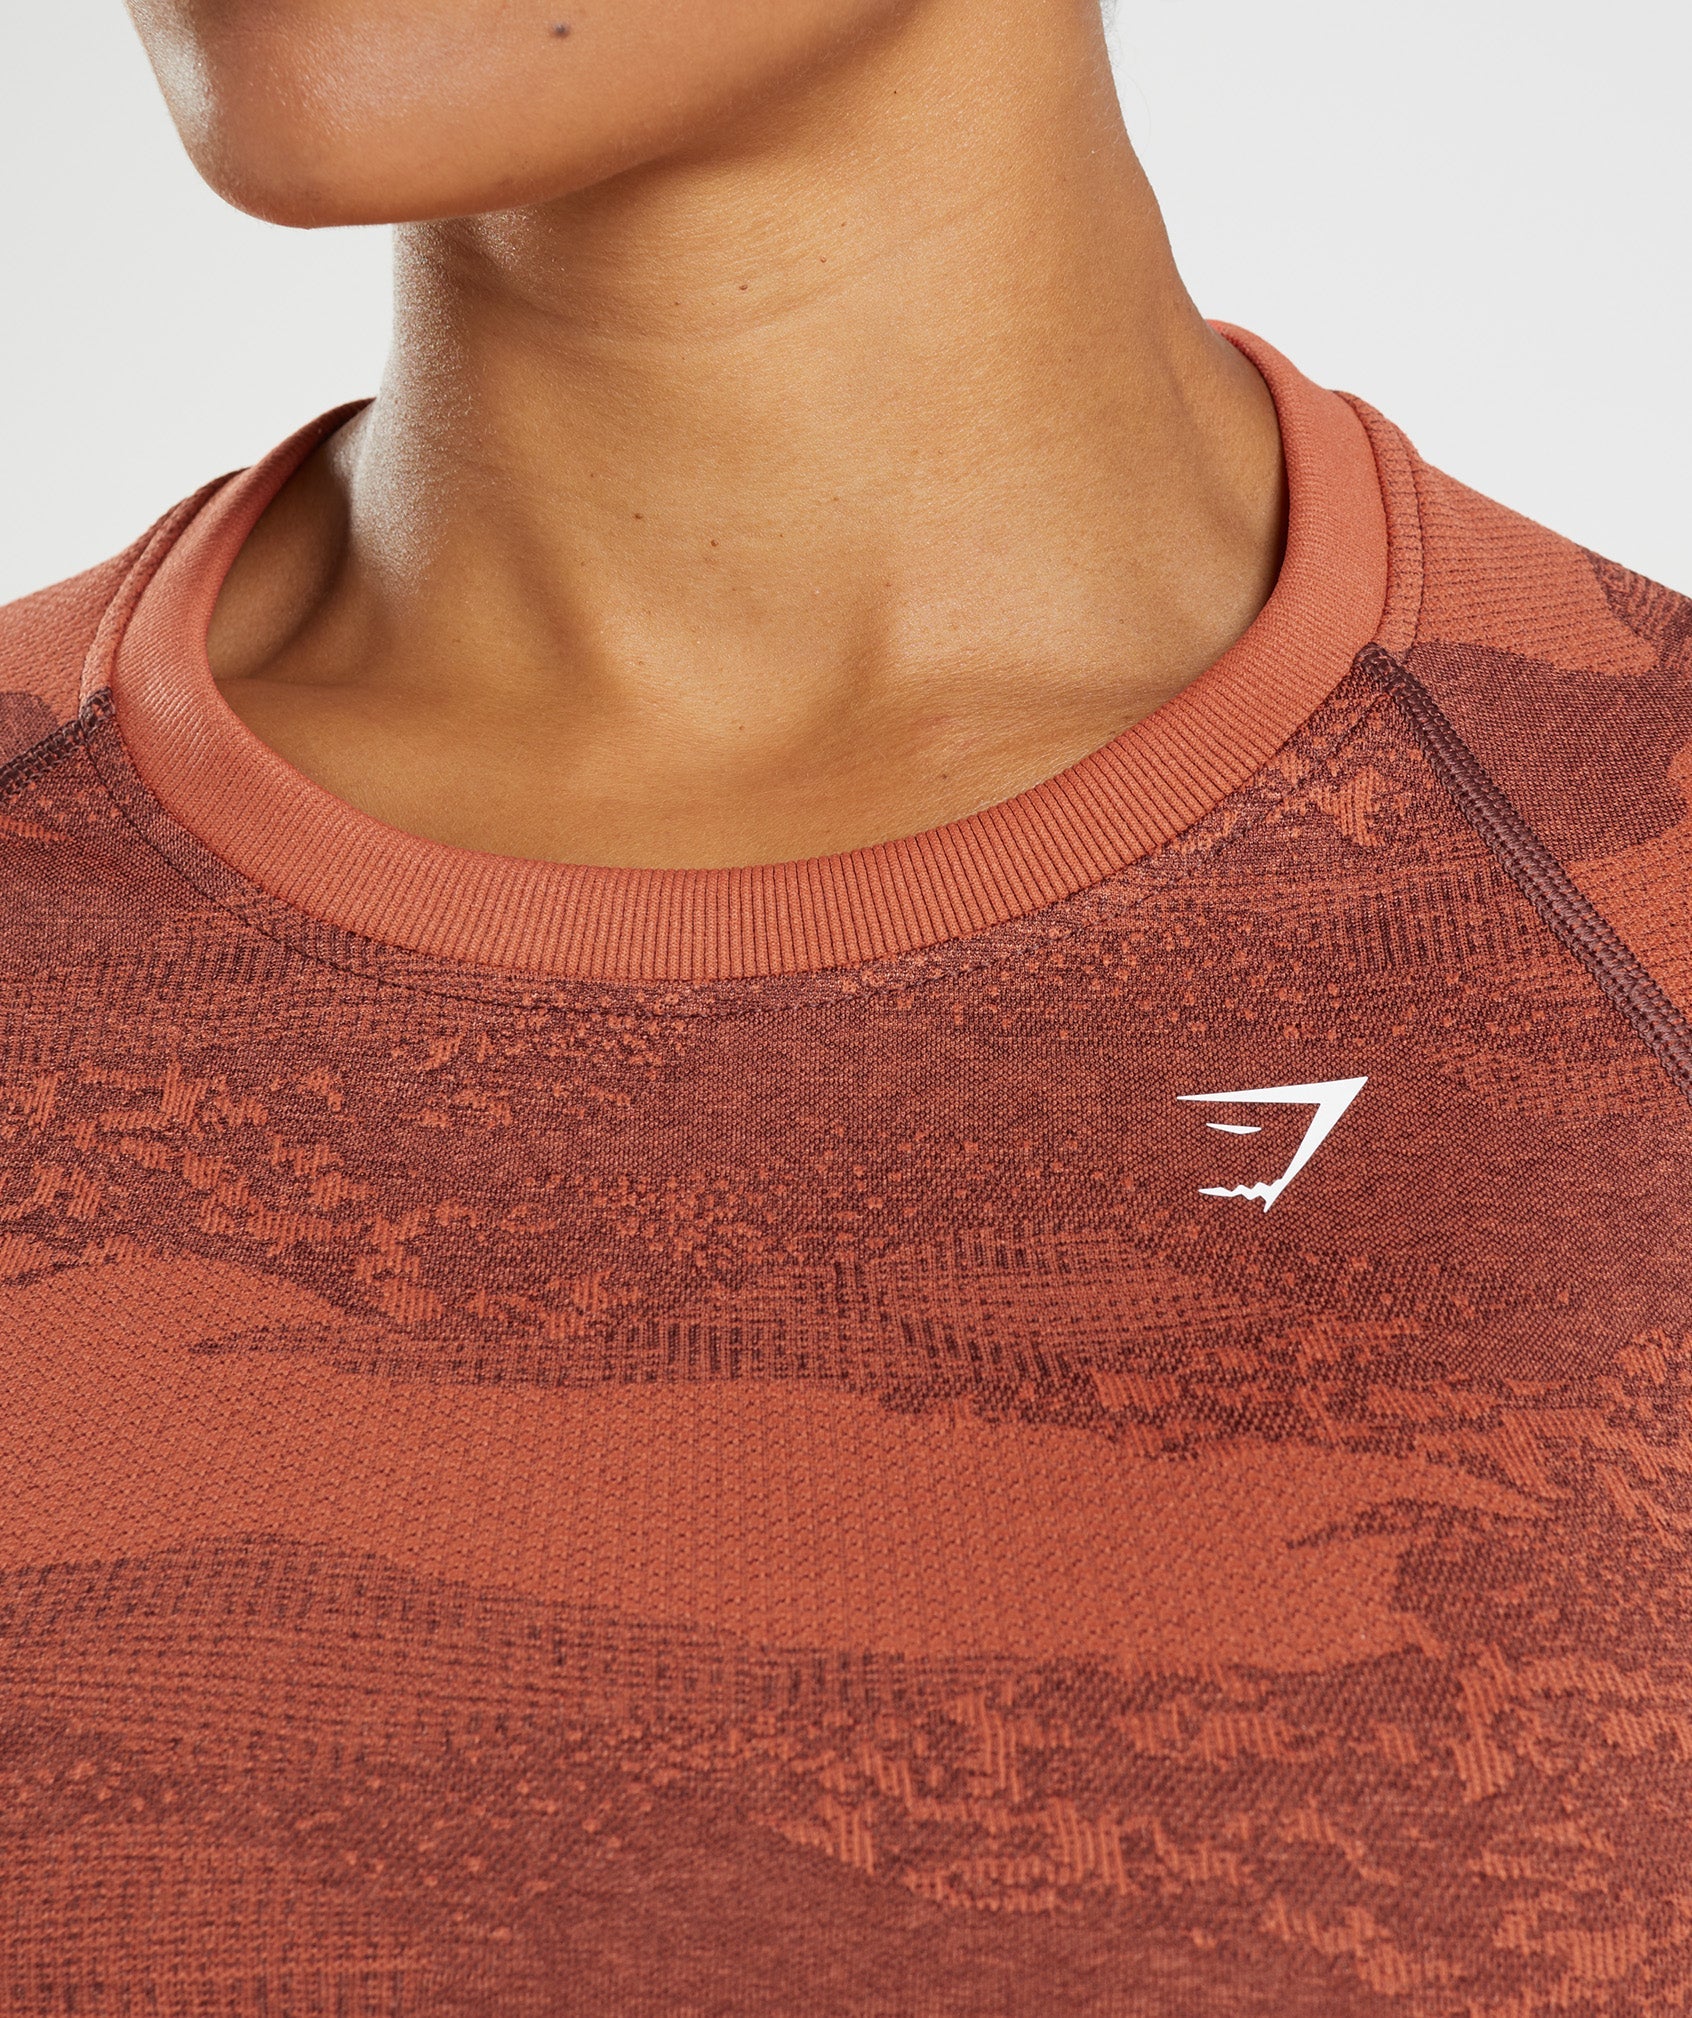 Adapt Camo Seamless Lace Up Back Top in Storm Red/Cherry Brown - view 6